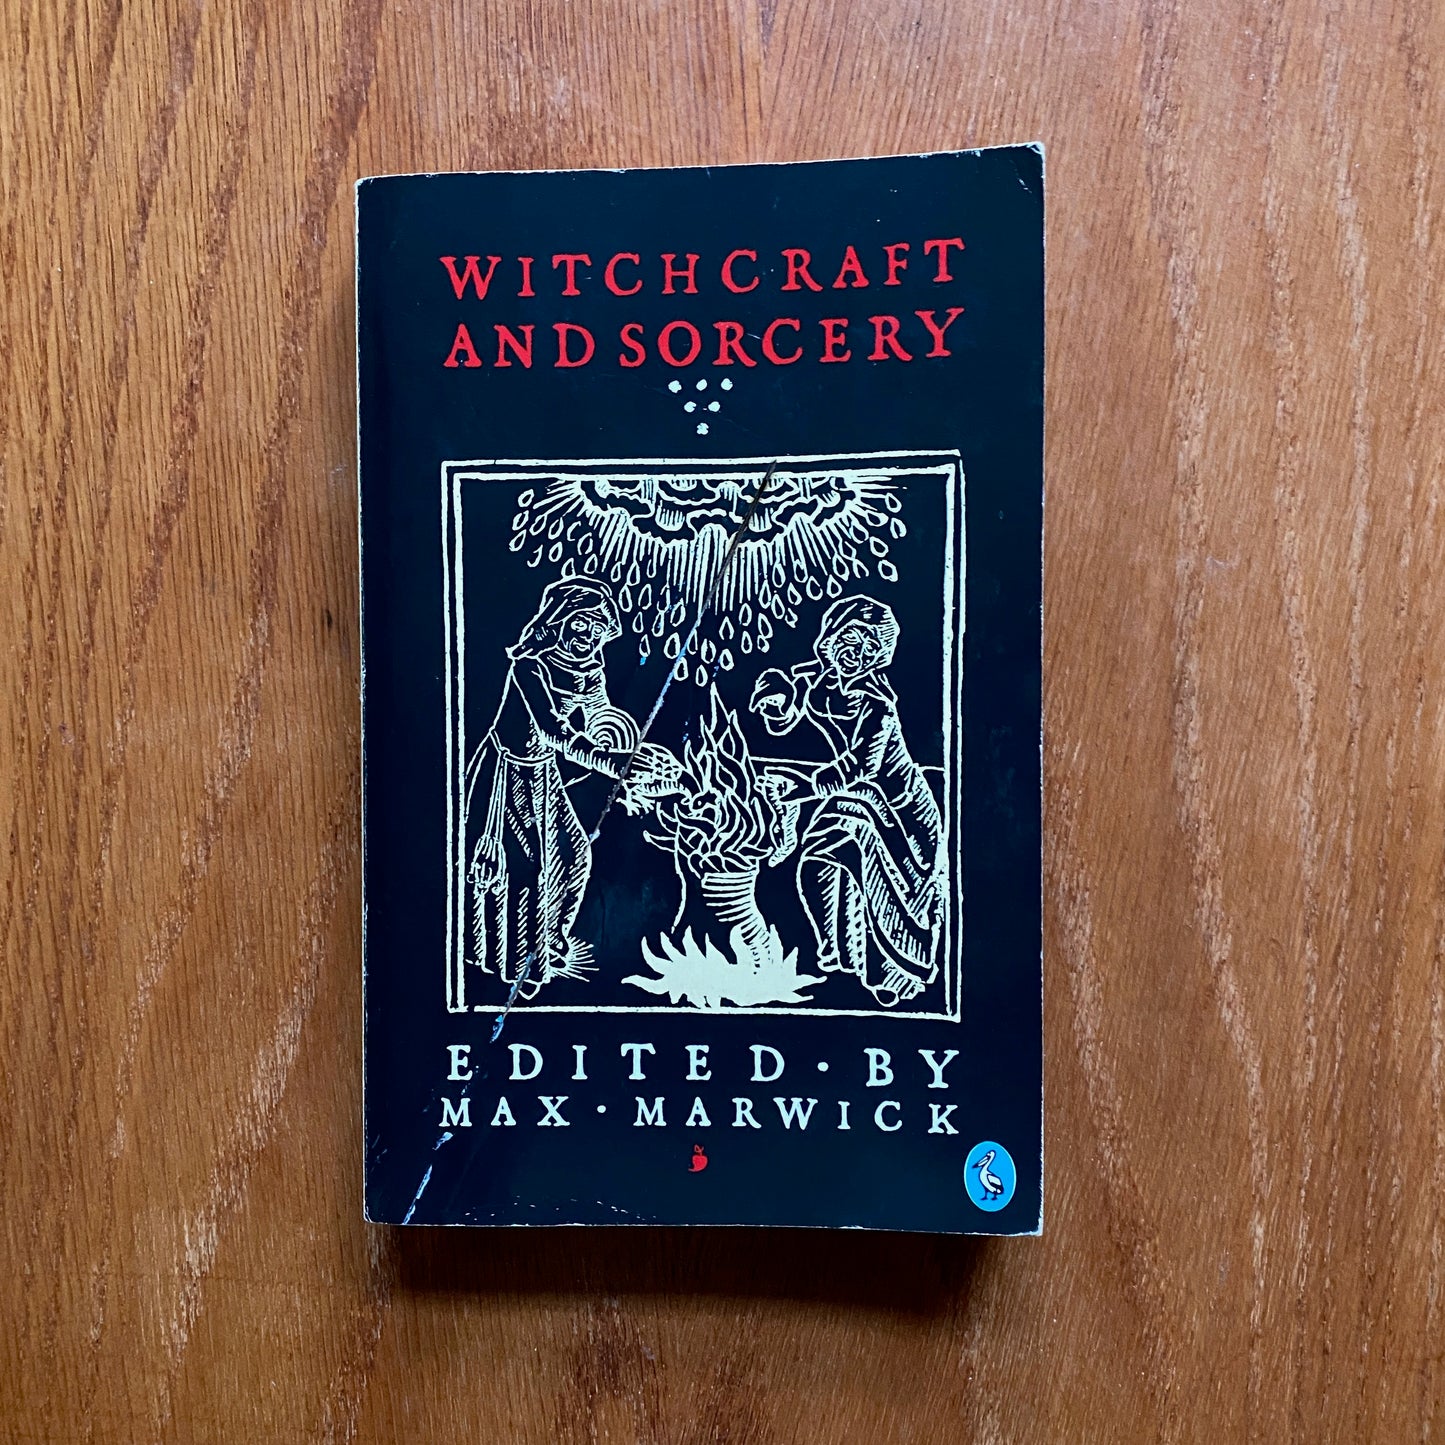 Witchcraft and Sorcery - Max Marwick